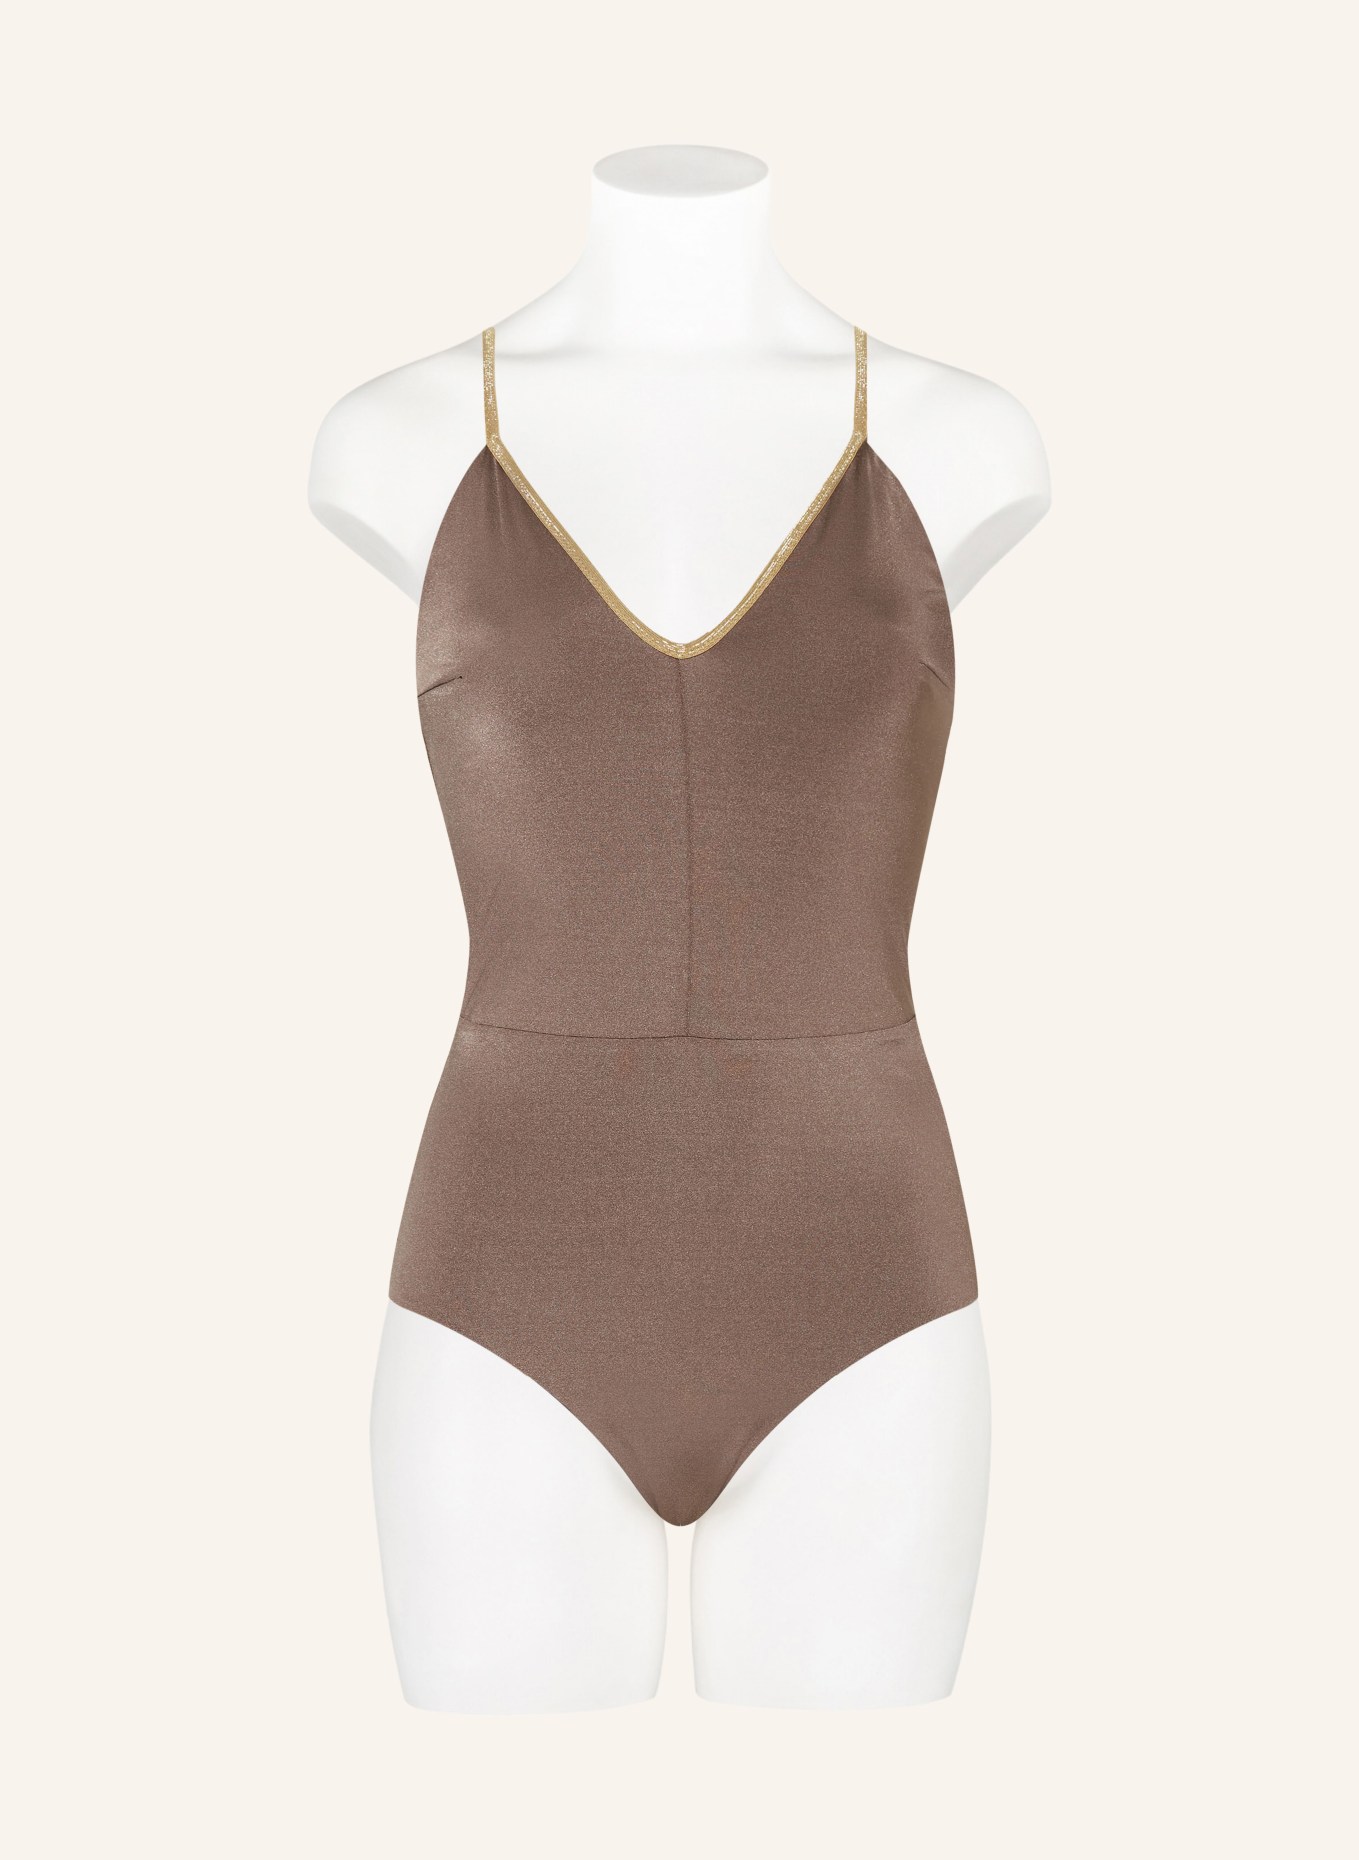 MYMARINI Swimsuit SHINE reversible with UV protection 50+, Color: BROWN (Image 4)